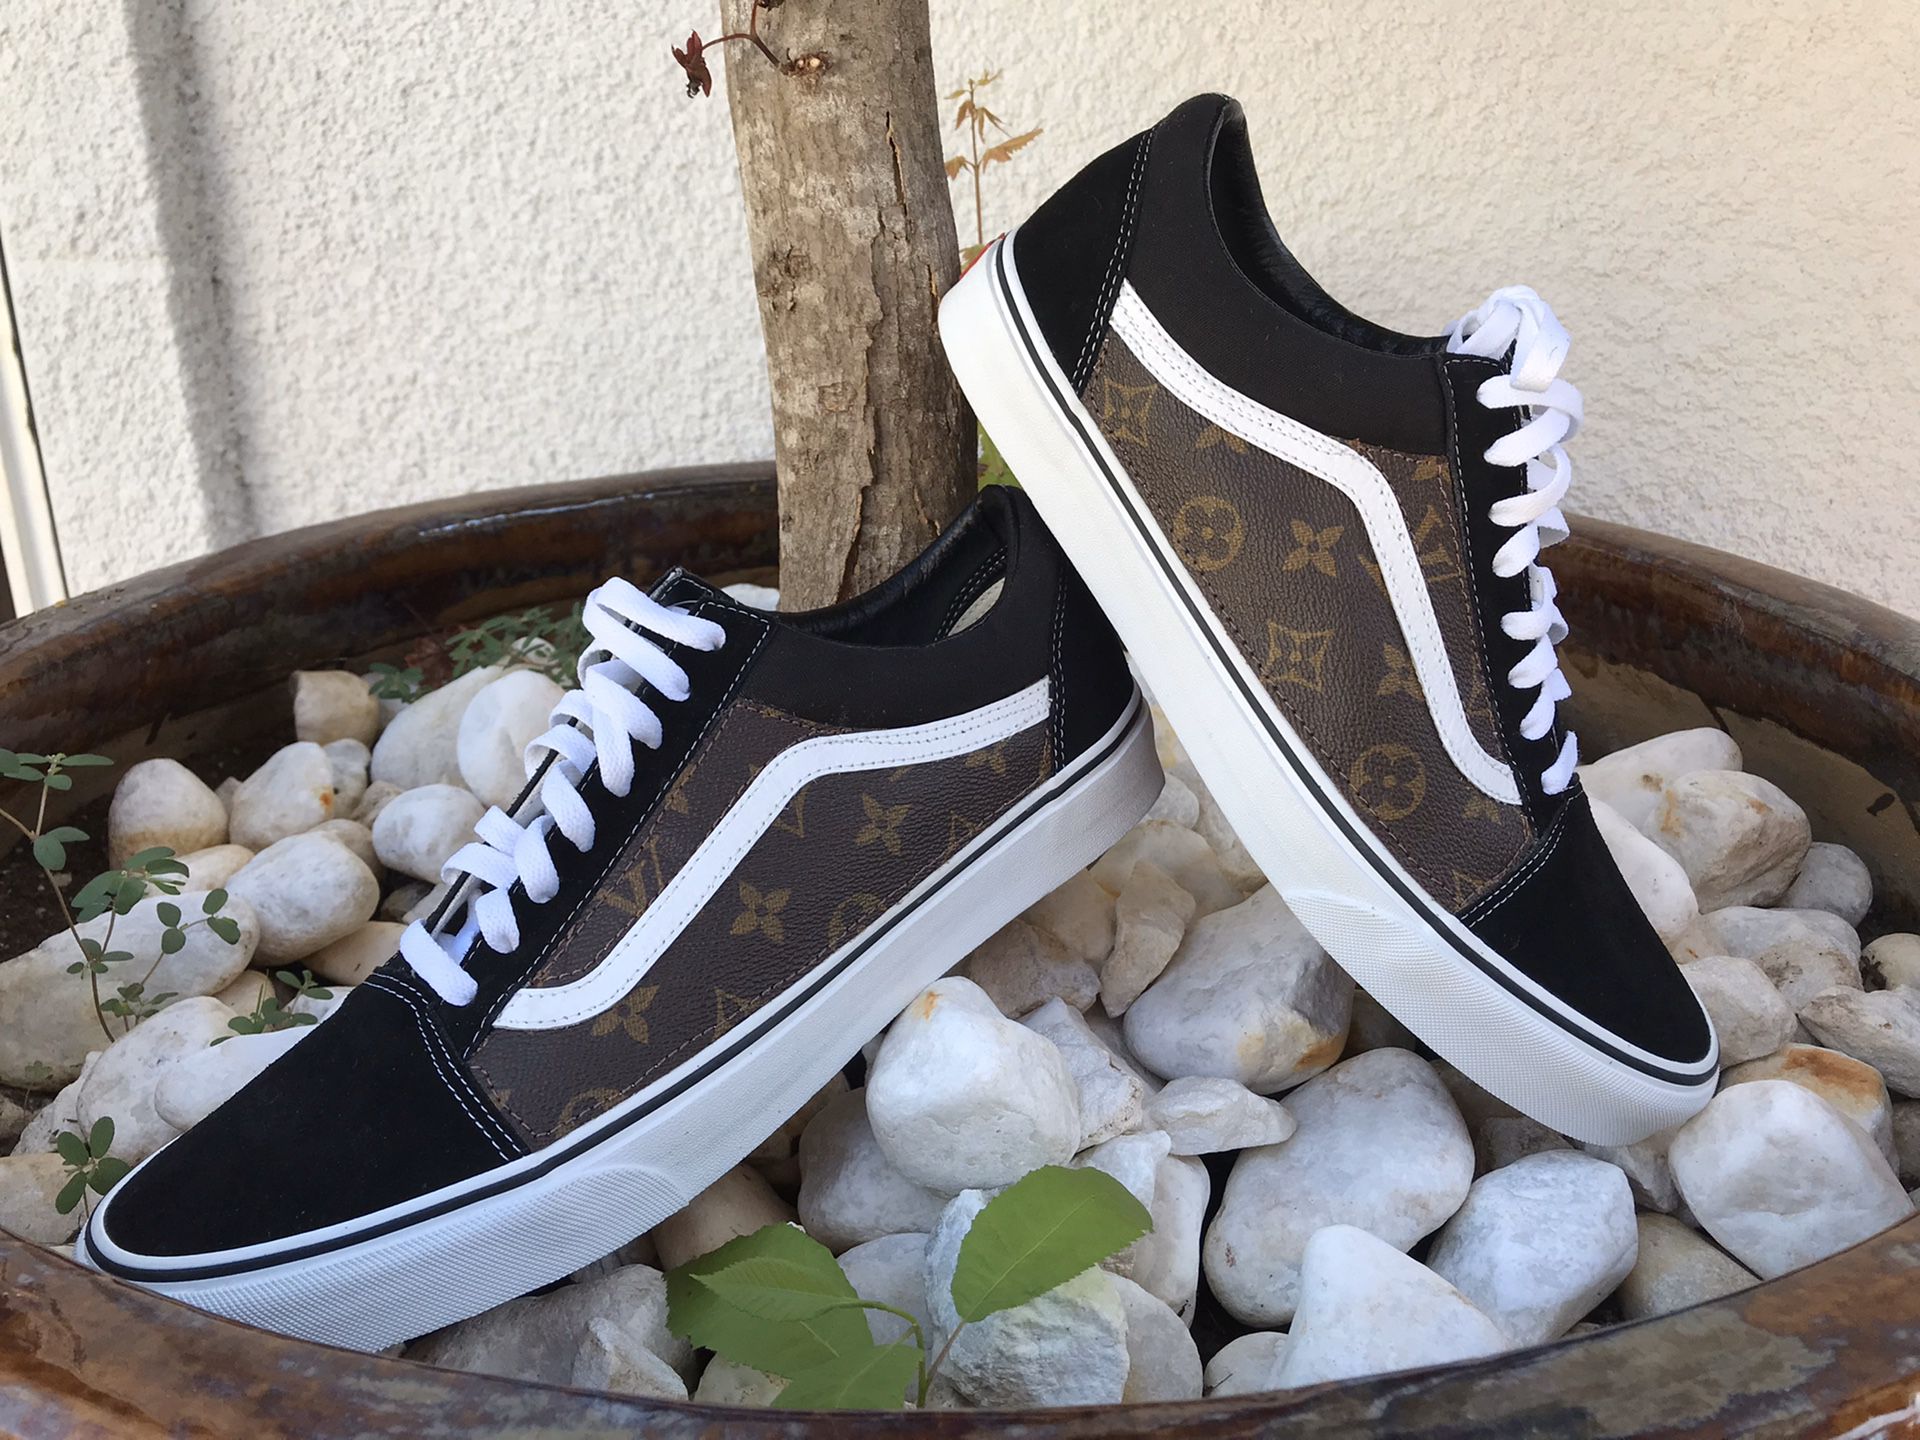 Custom Louis Vuitton Vans / Made From Authentic Bag! 